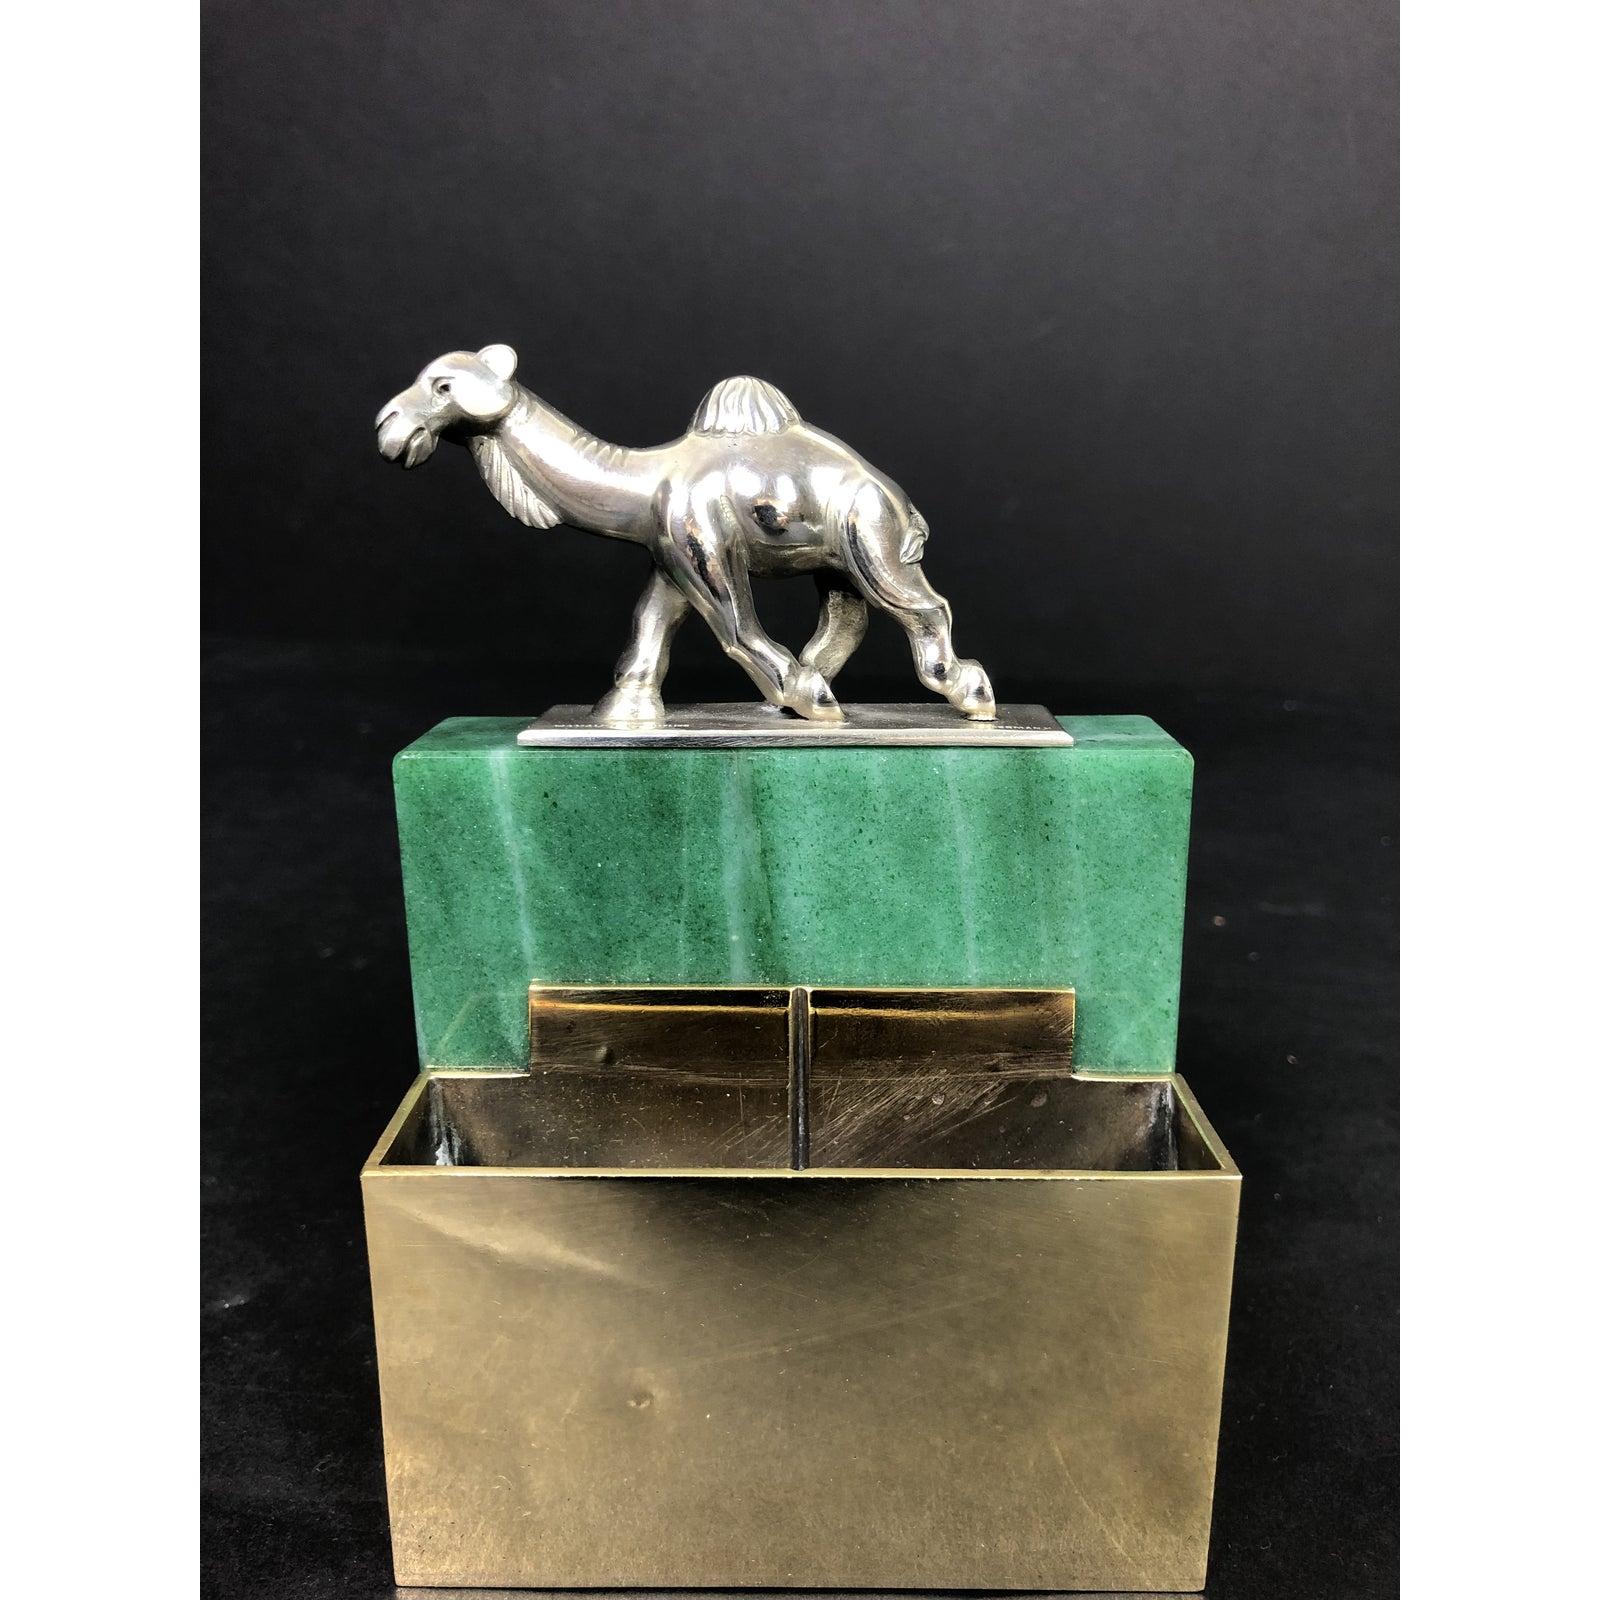 Post Art Deco sculpture by Erik Magnussen (1884-1961) a well known Danish designer-silversmith. This unique item is sterling silver, bronze and aventurine. A beautiful and creative use of materials. A stylized camel marked sterling sits at top of